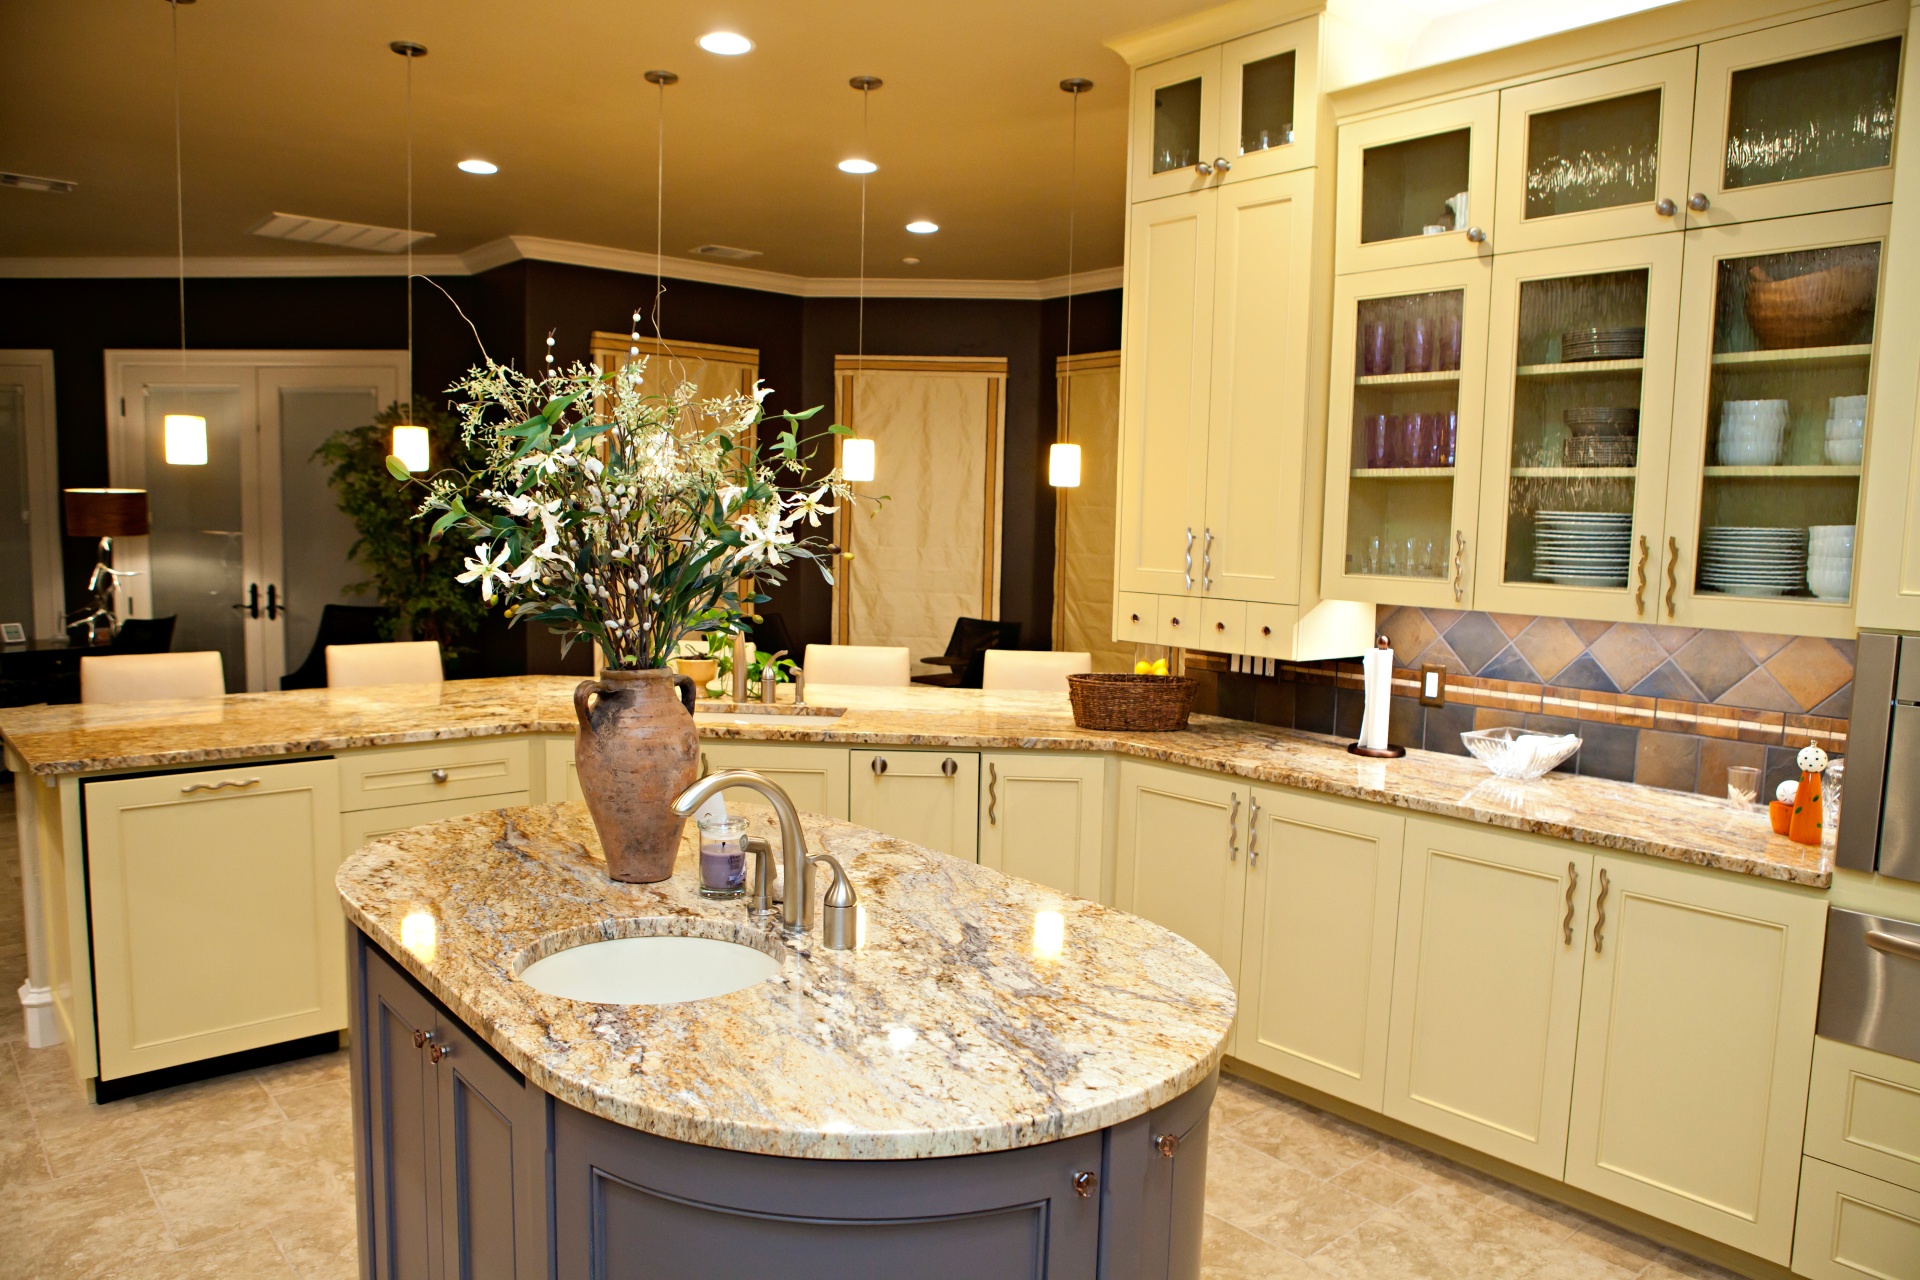 kitchen area with flower vase on countertop